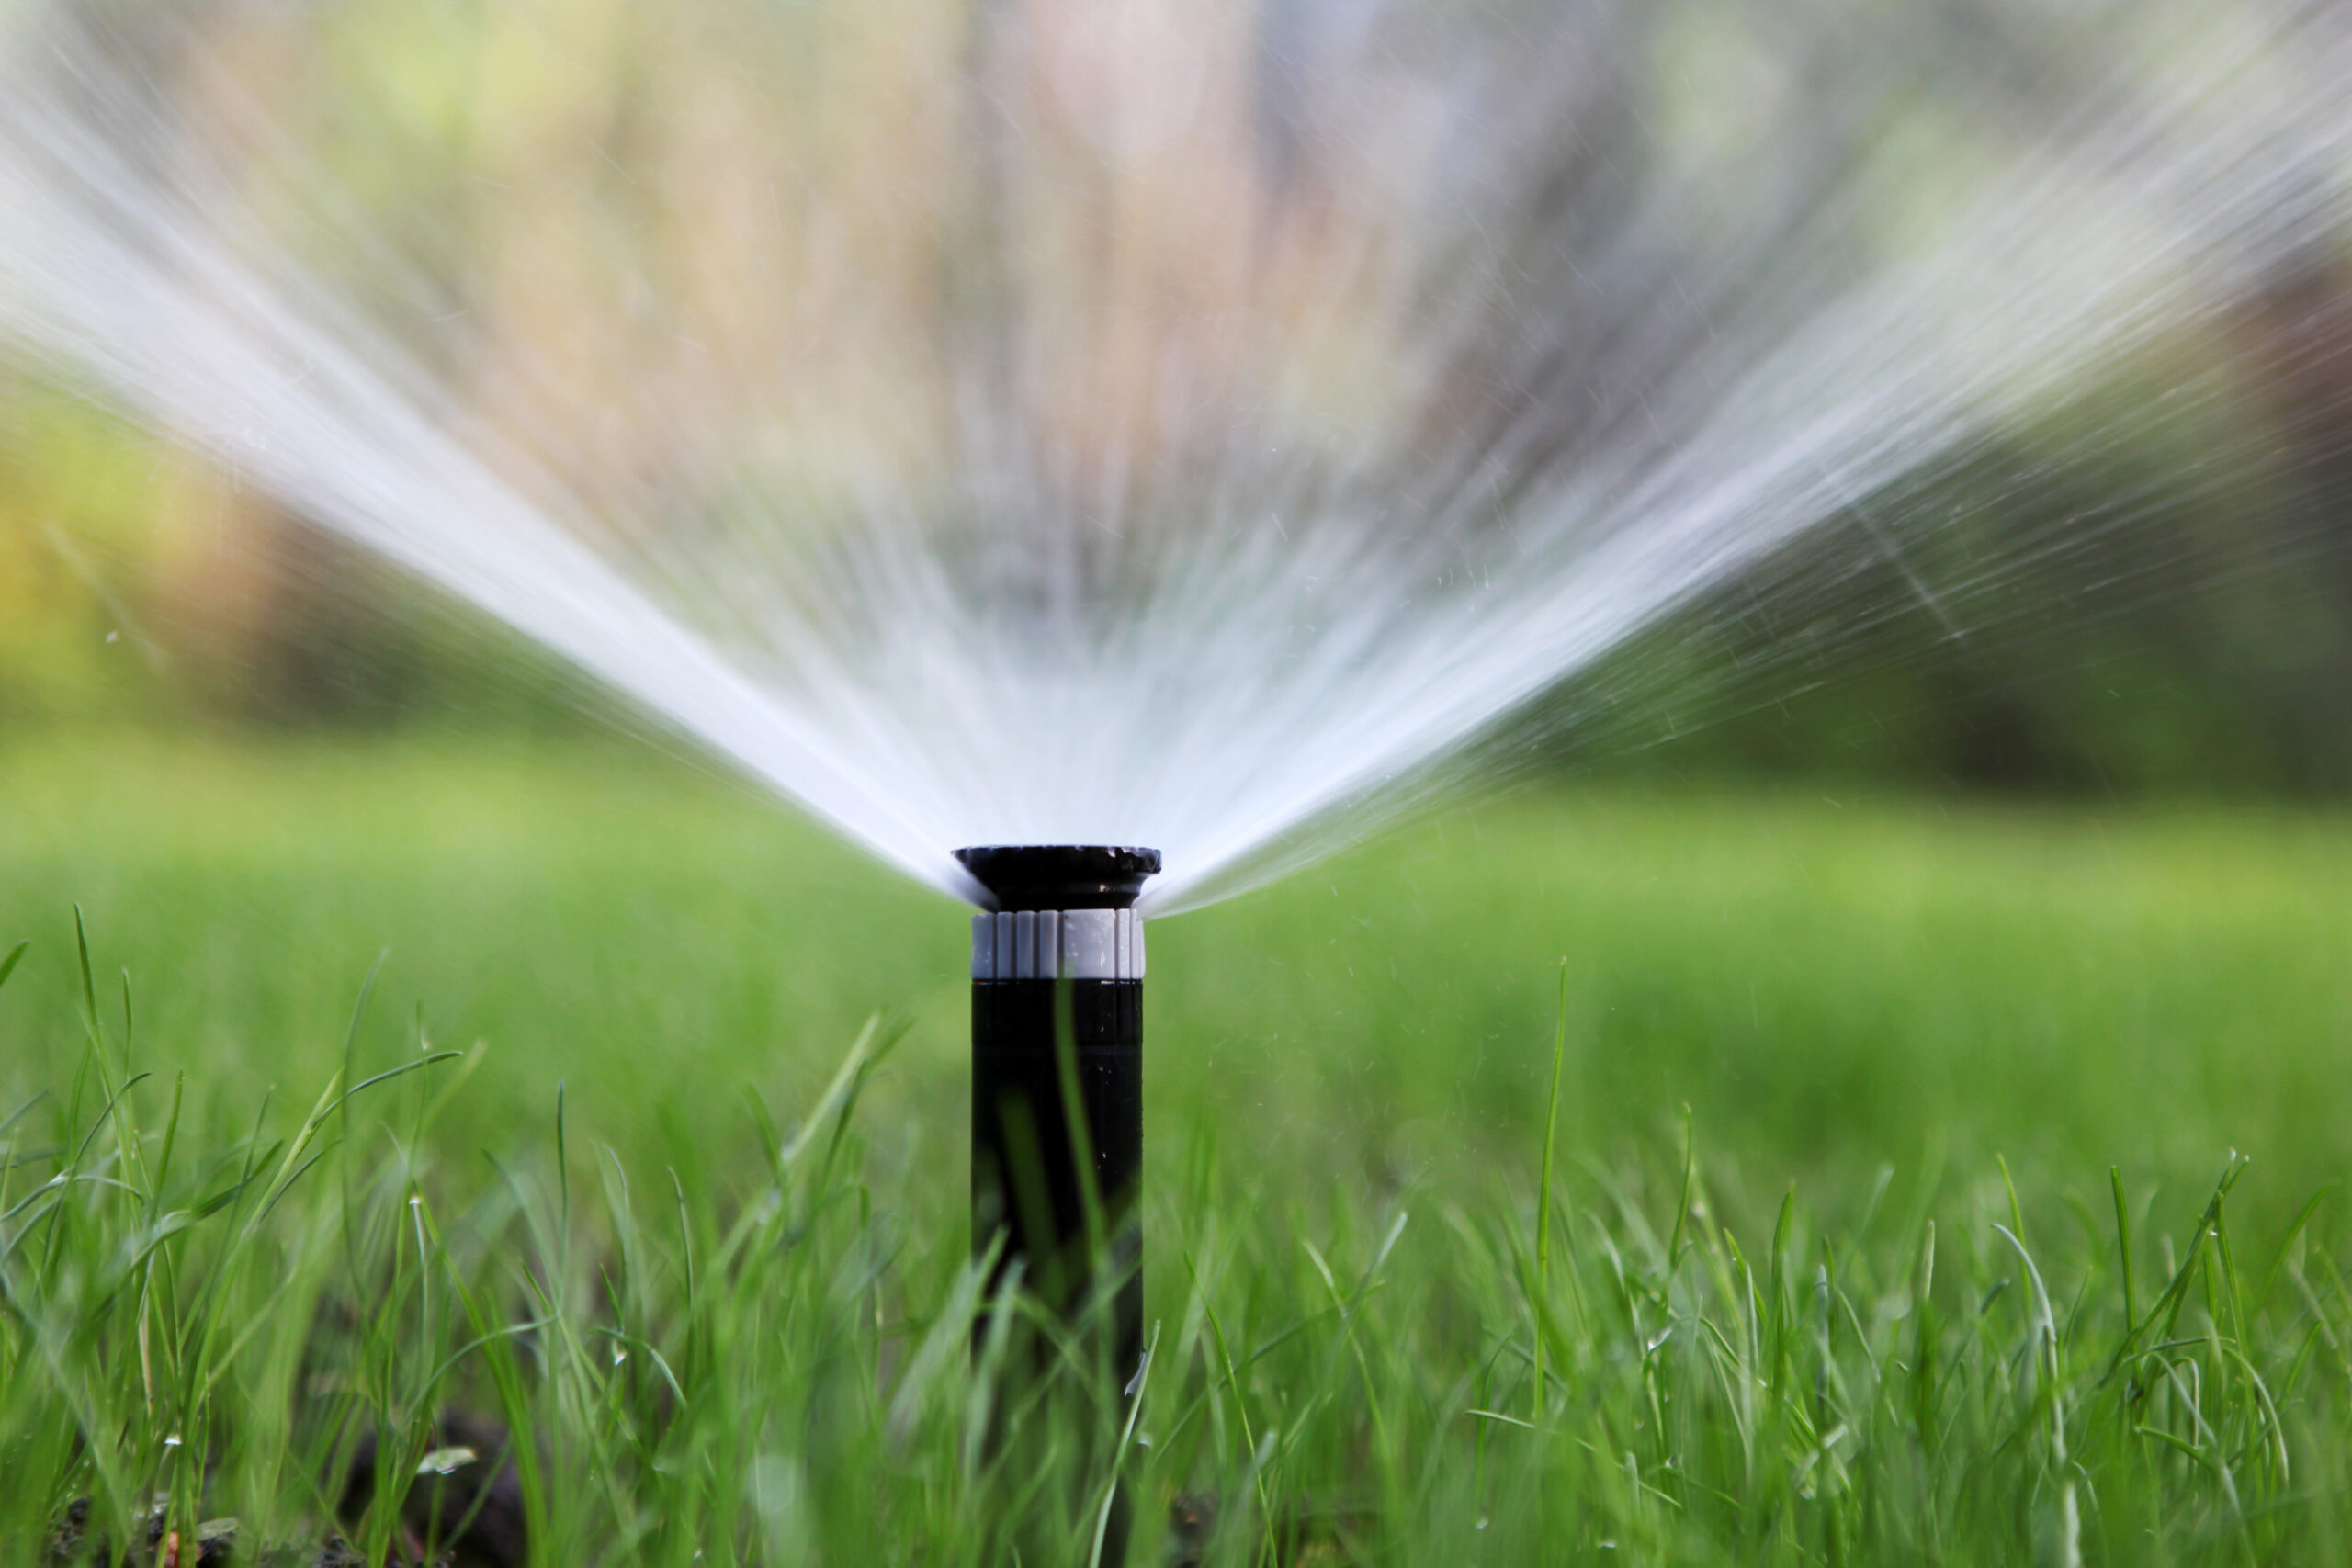 Does Your Irrigation System Need An Upgrade?